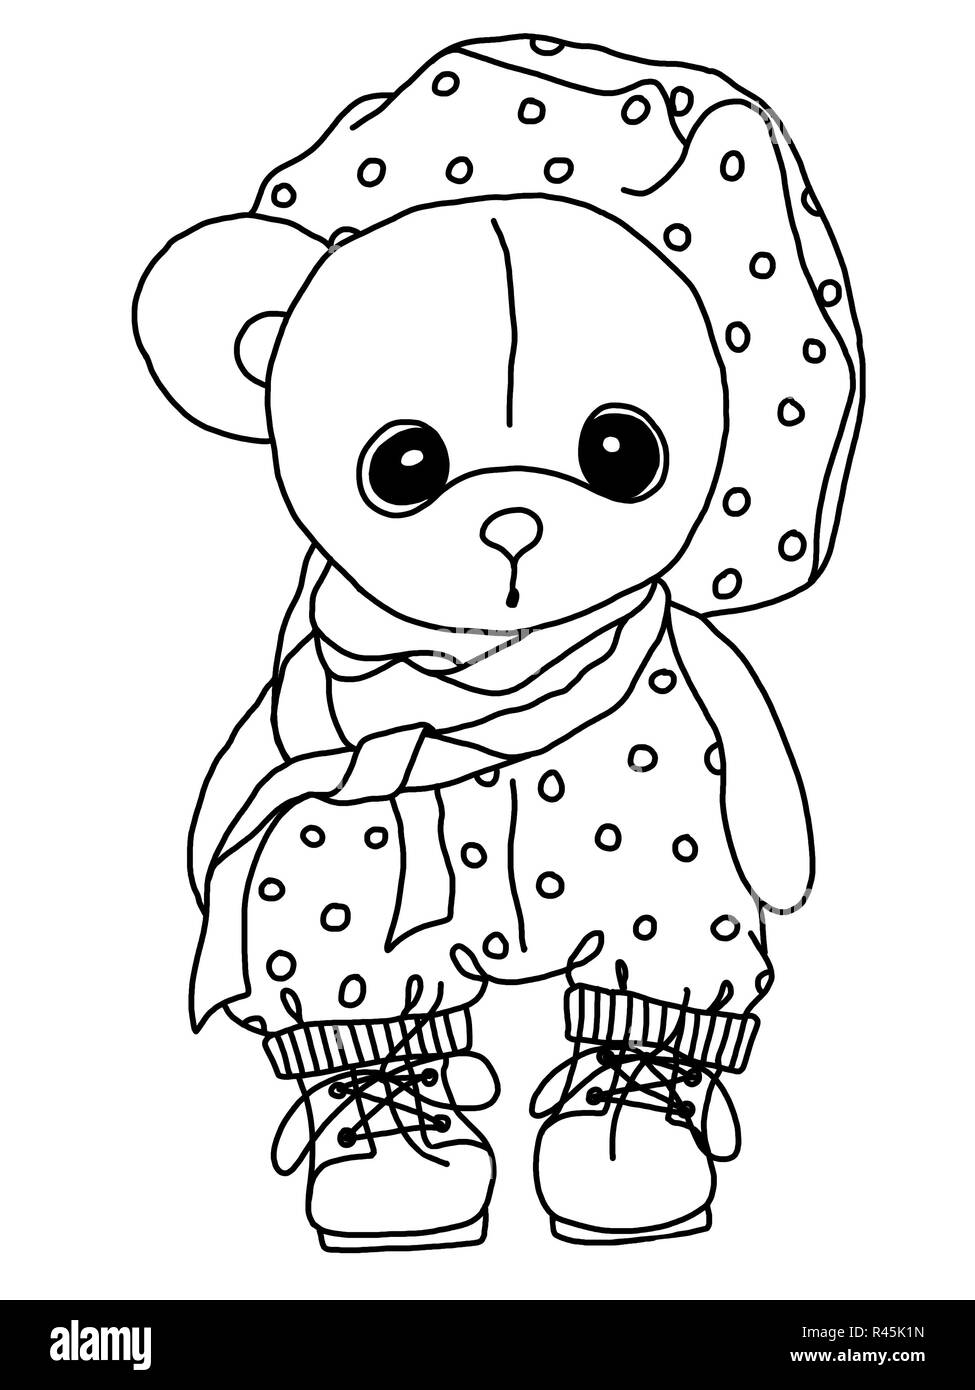 Coloration teddy bear. Black and white coloring. Teddy Bear. A toy. Drawn by hand. Black outline. Sad plush soft bear. Ink Stock Photo